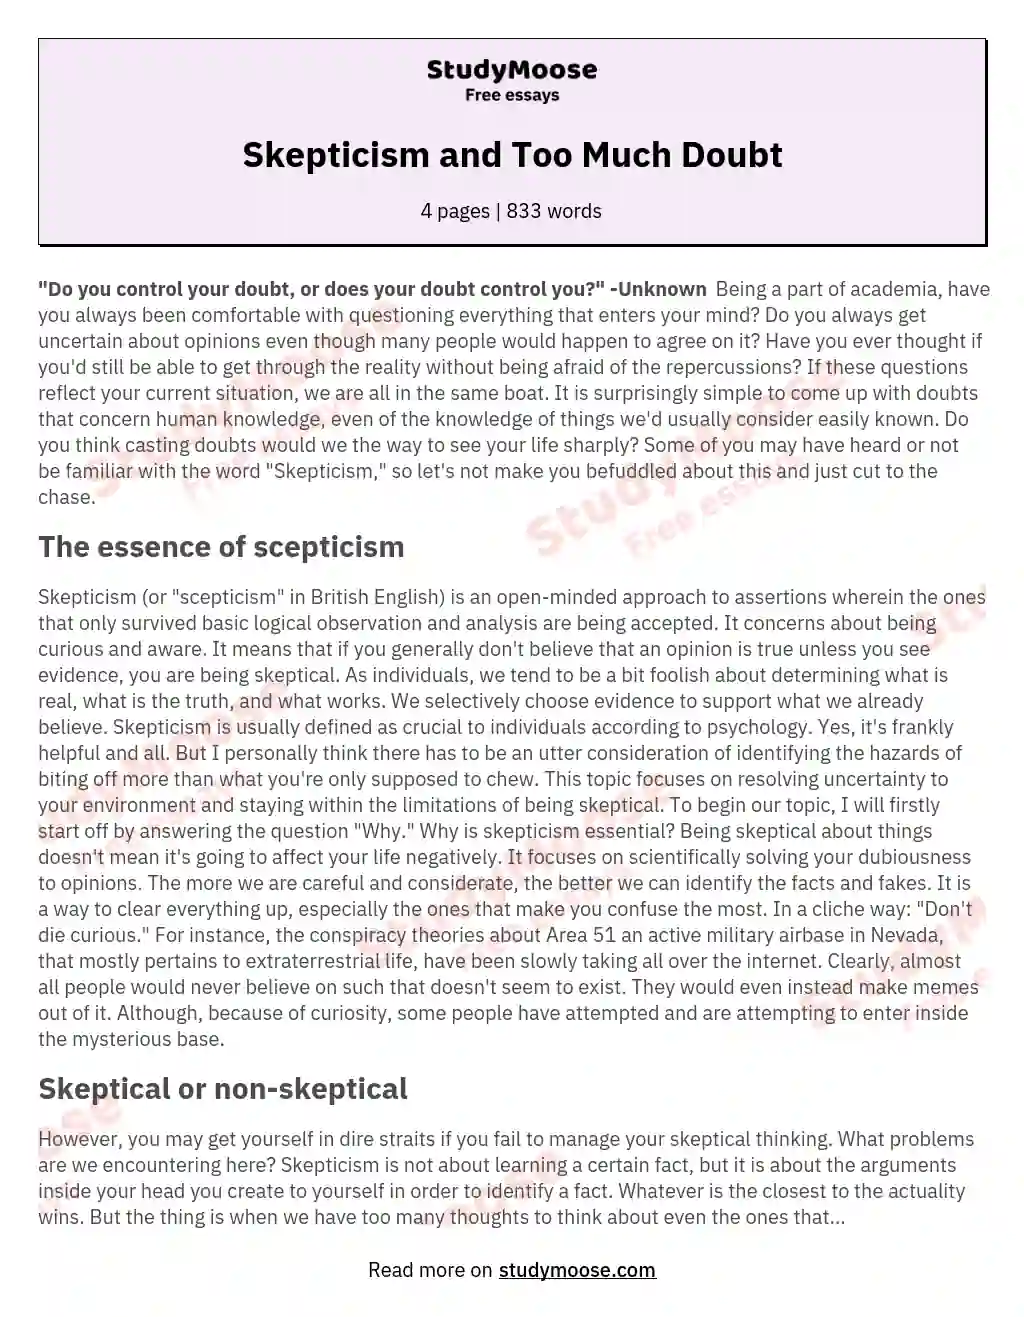 Skepticism and Too Much Doubt essay